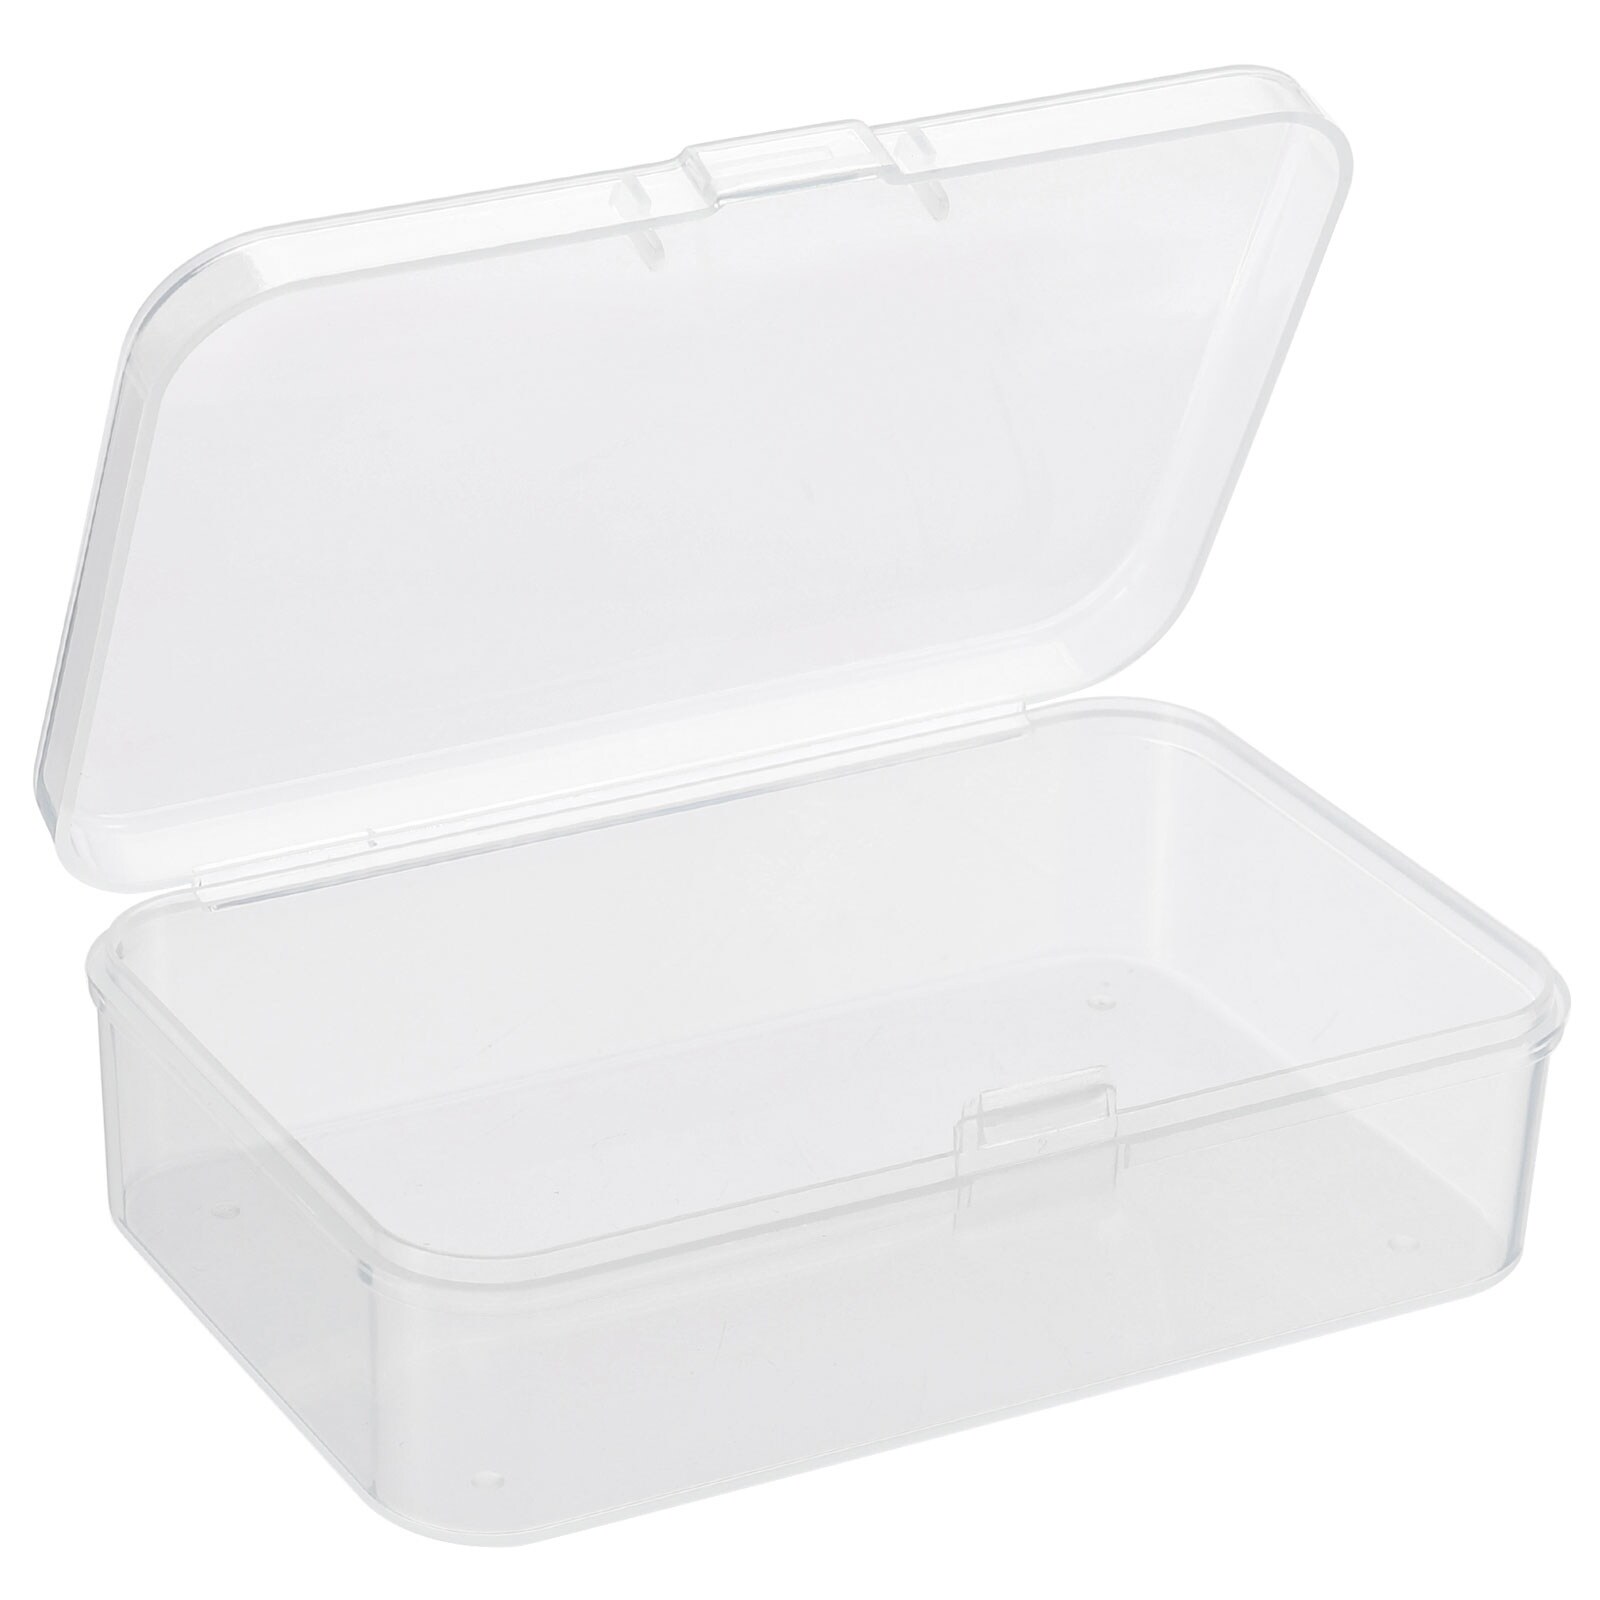 Up To 60% Off on Storagebud Stackable Plastic